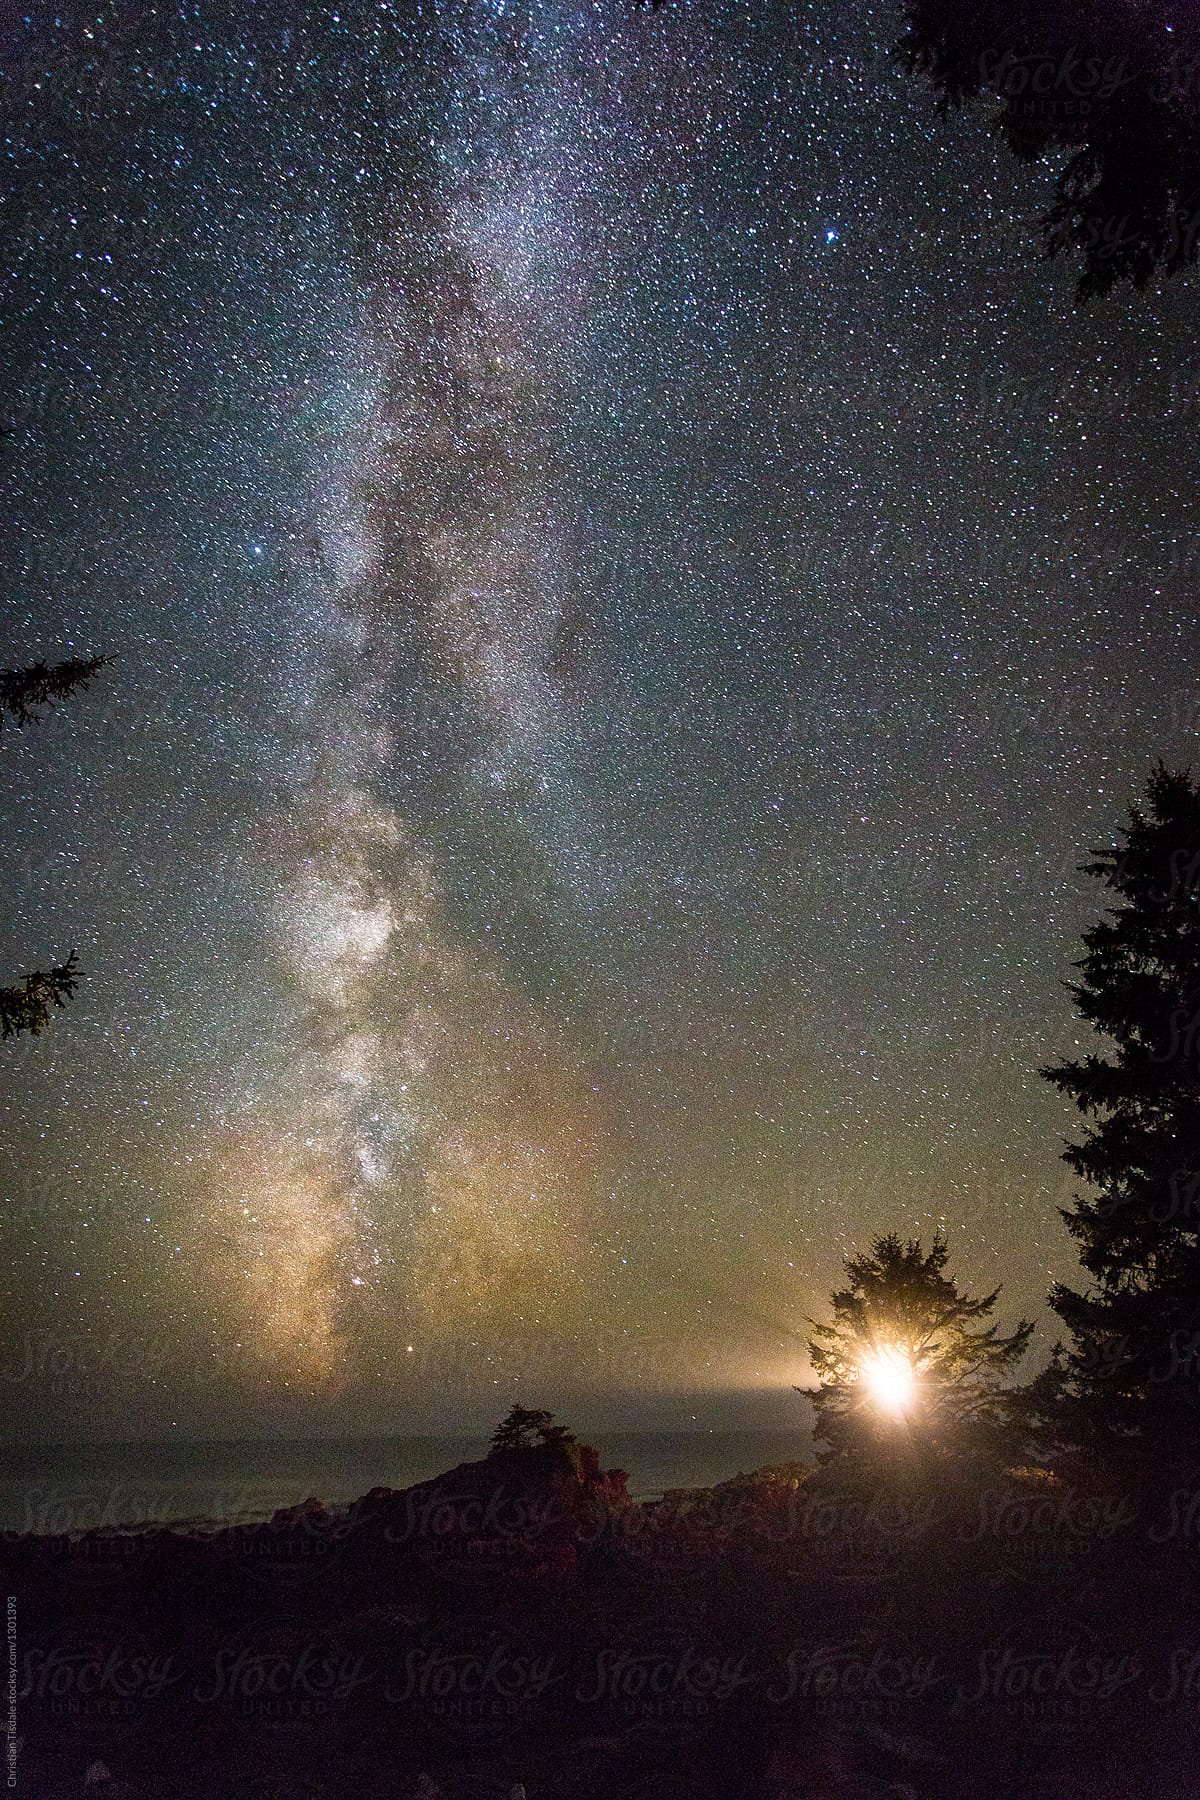 Lighthouse on the coast of Vancouver Island with the Milky Way rising above it